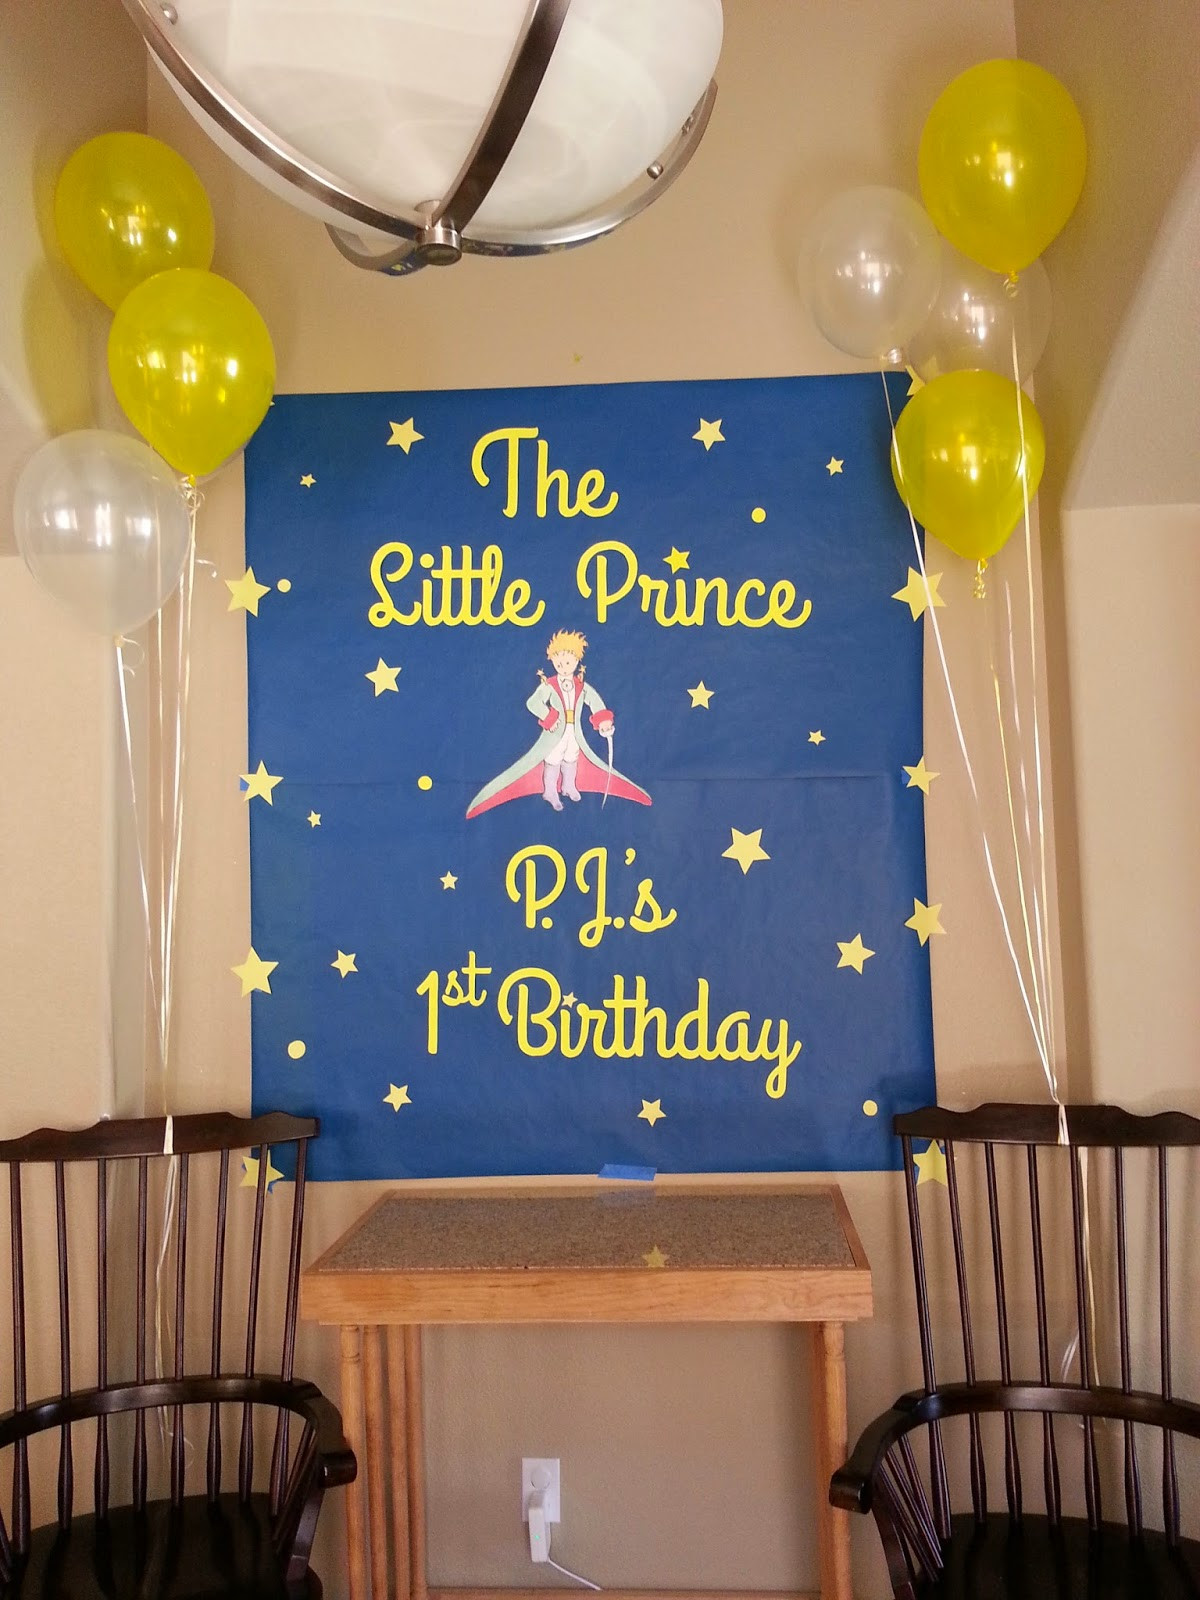 Prince Birthday Decorations
 The Little Prince Birthday Party